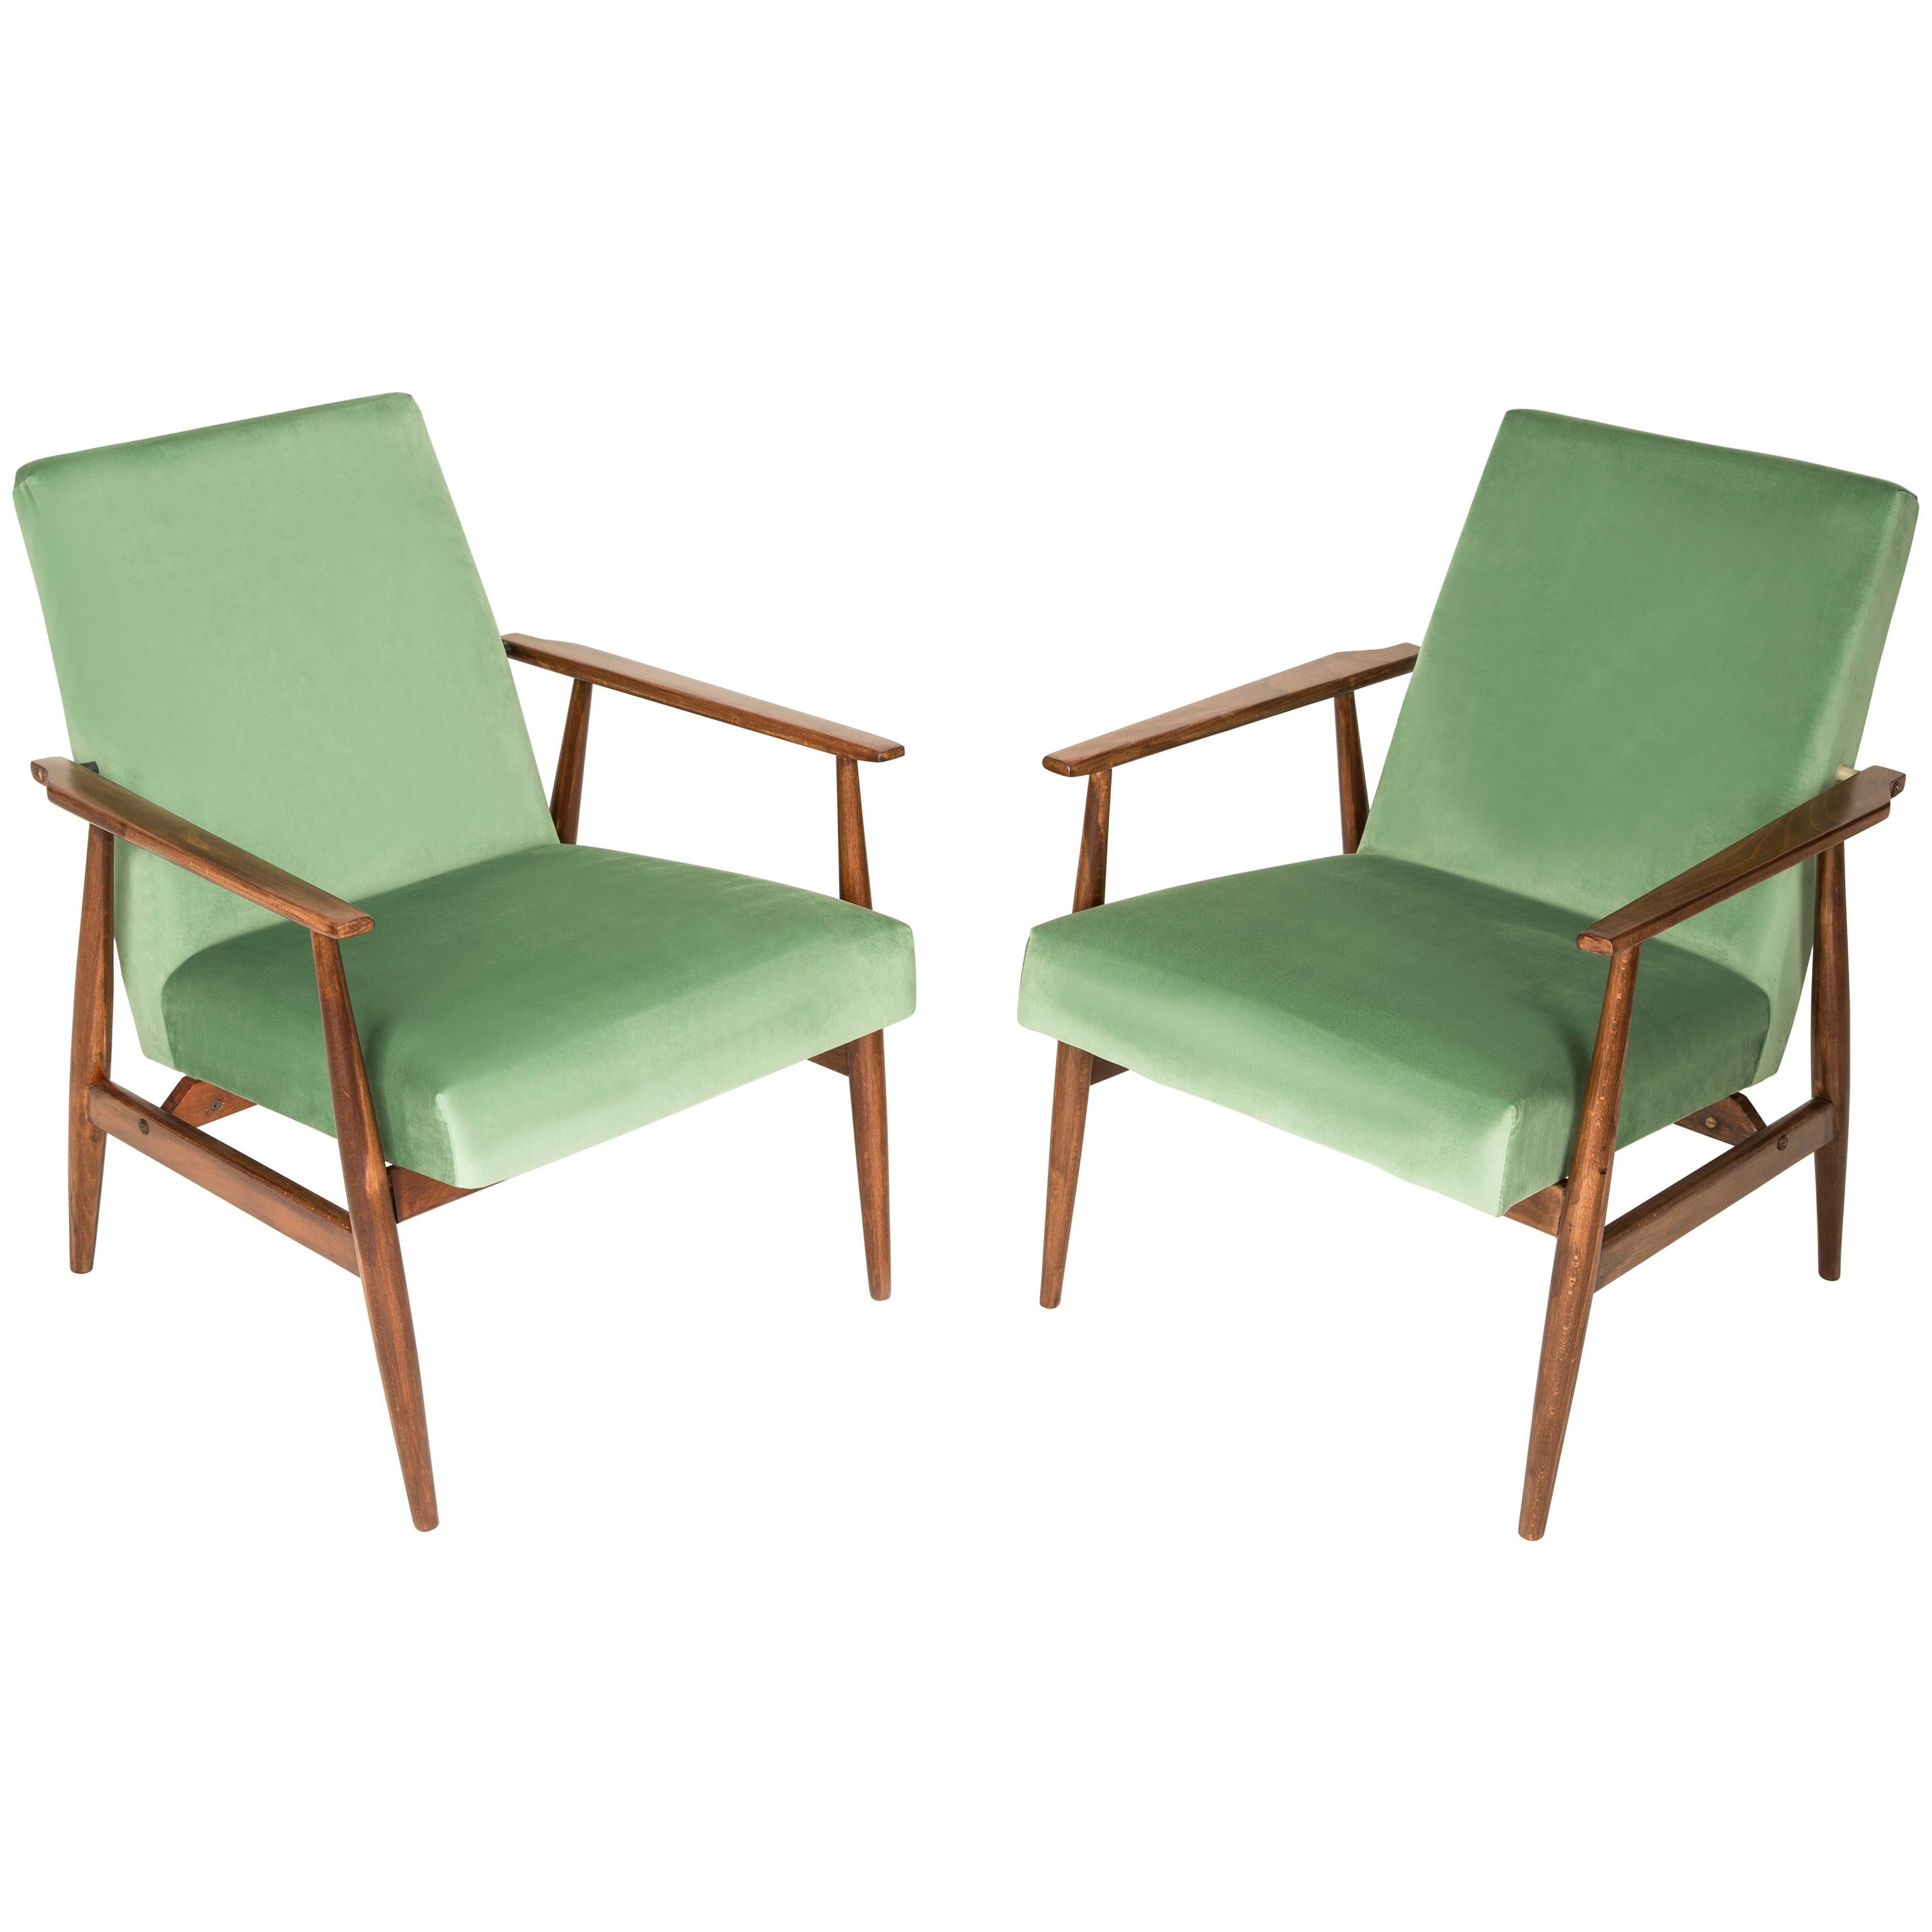 20th Century Pair of Mint Green Dante Armchairs, H. Lis, 1960s